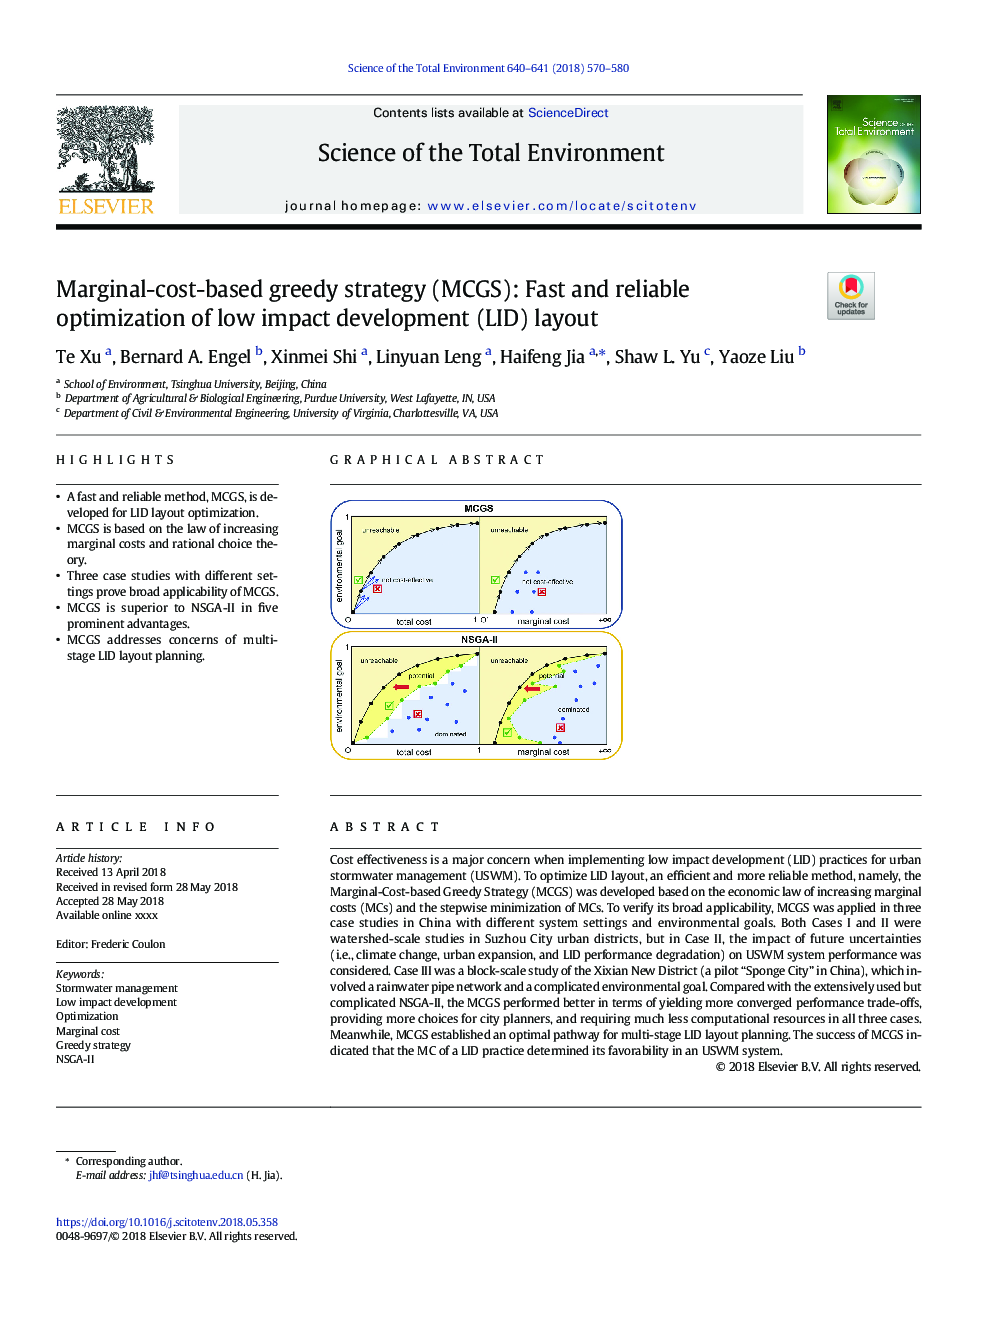 Marginal-cost-based greedy strategy (MCGS): Fast and reliable optimization of low impact development (LID) layout